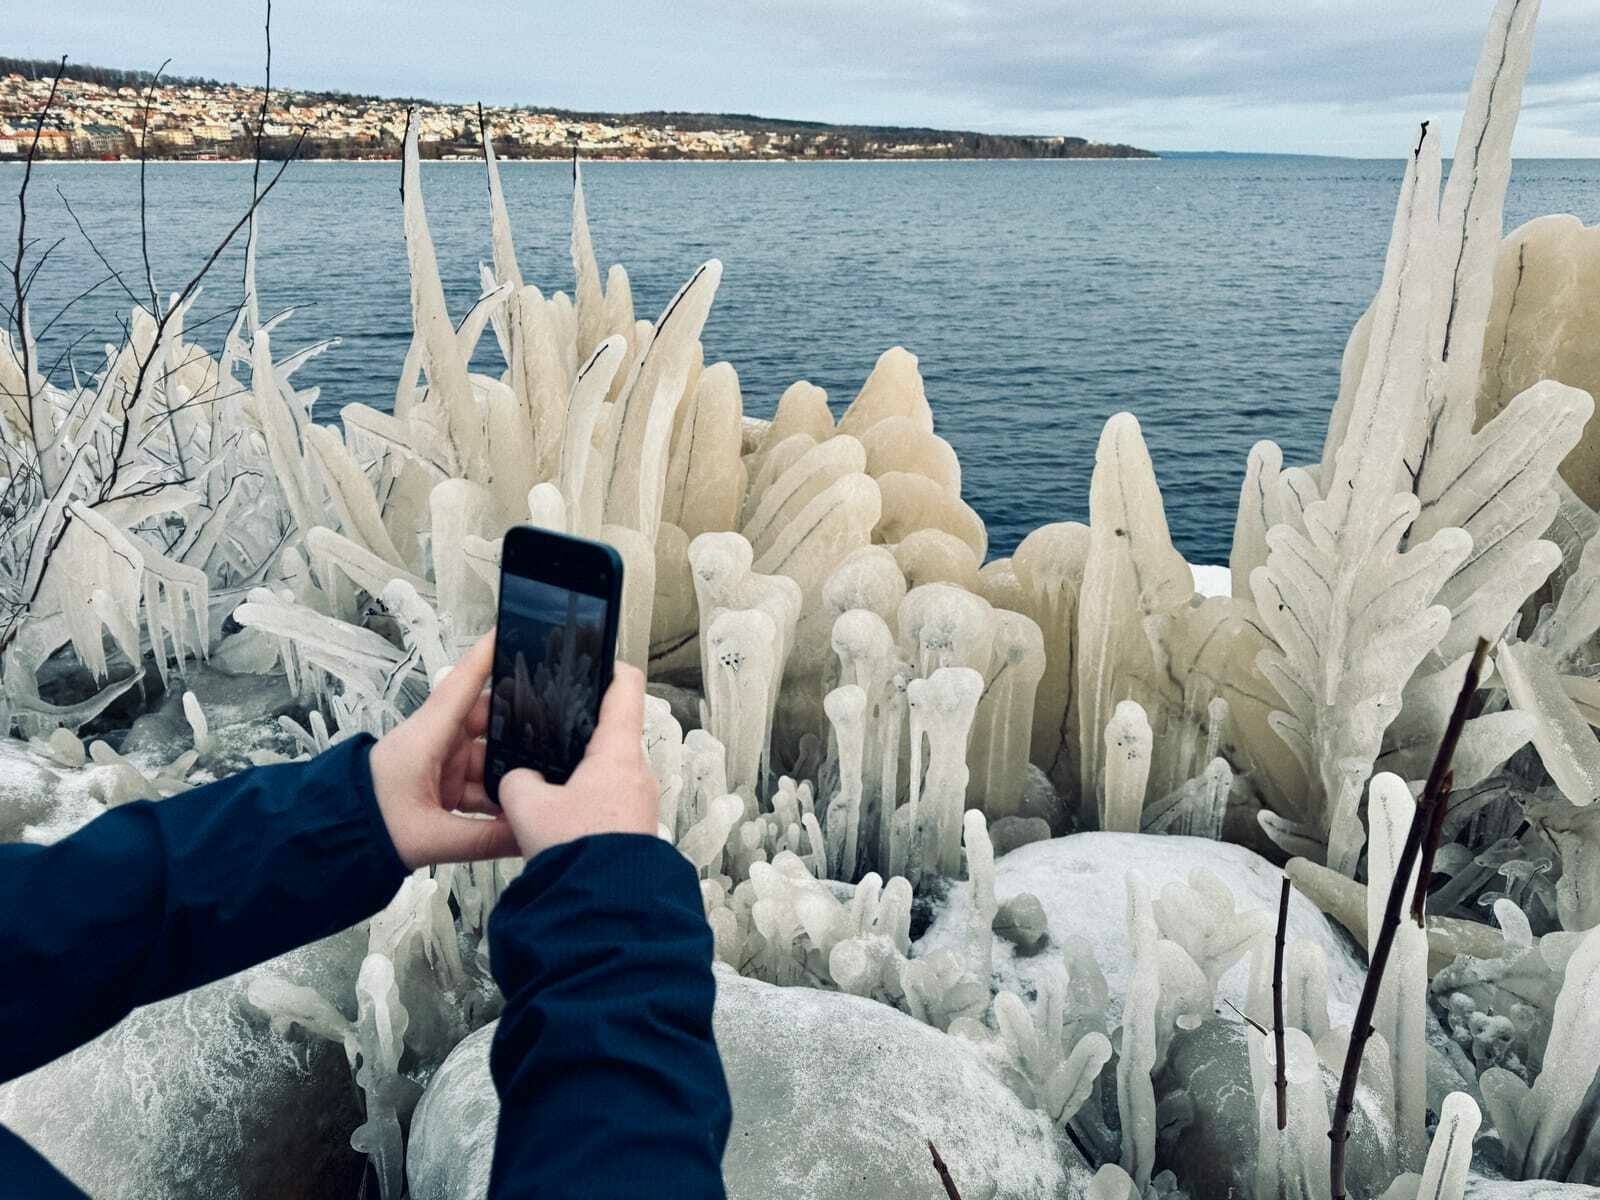 A photographer captures the surreal beauty of ice-draped vegetation with a smartphone. The frozen flora, resembling an otherworldly landscape, creates an eerie and alien ambiance.